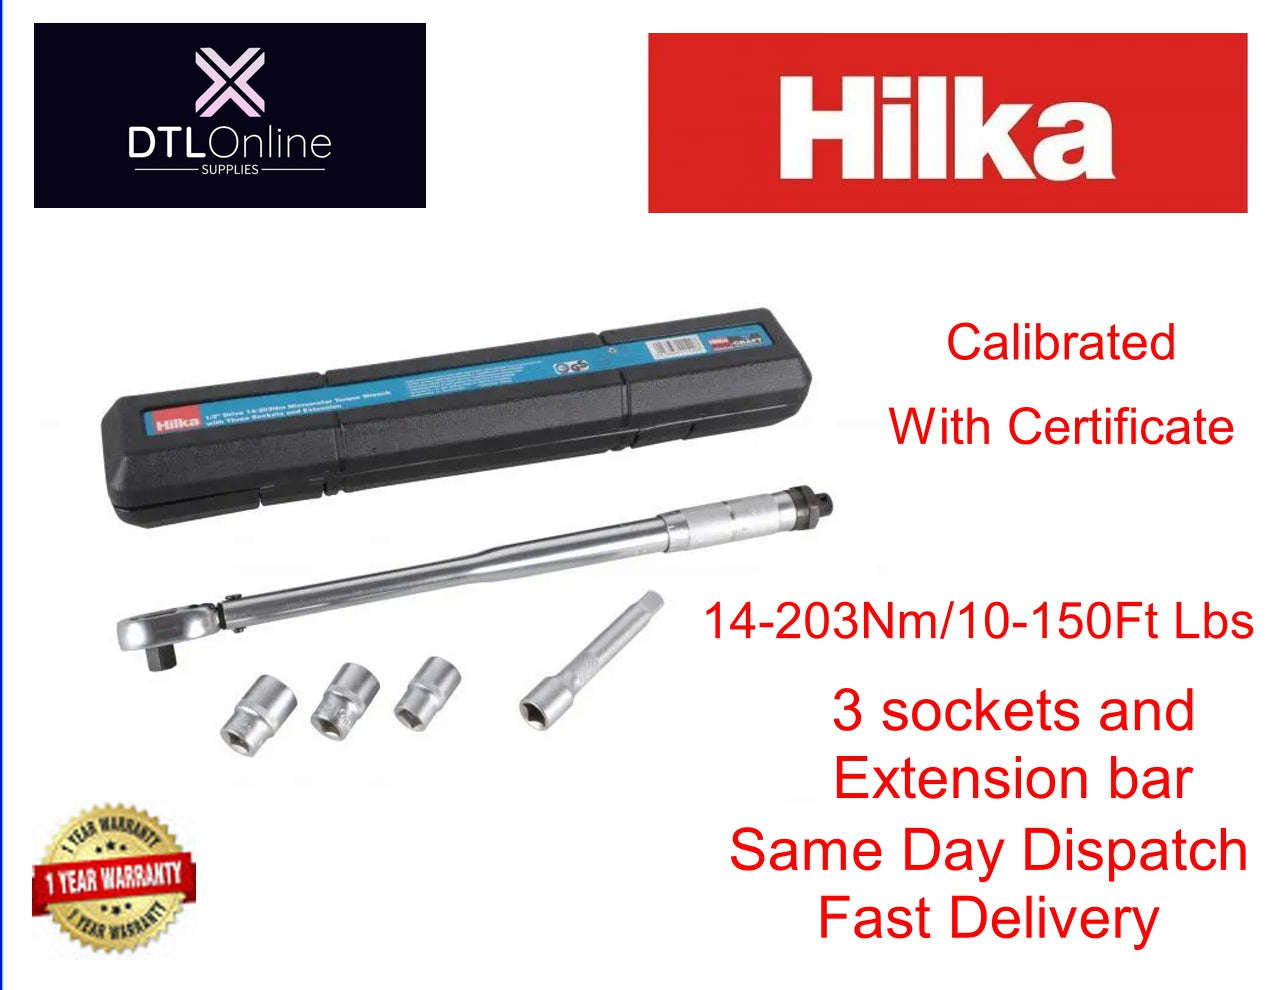 Hilka Torque Wrench with extension bar and 3 sockets